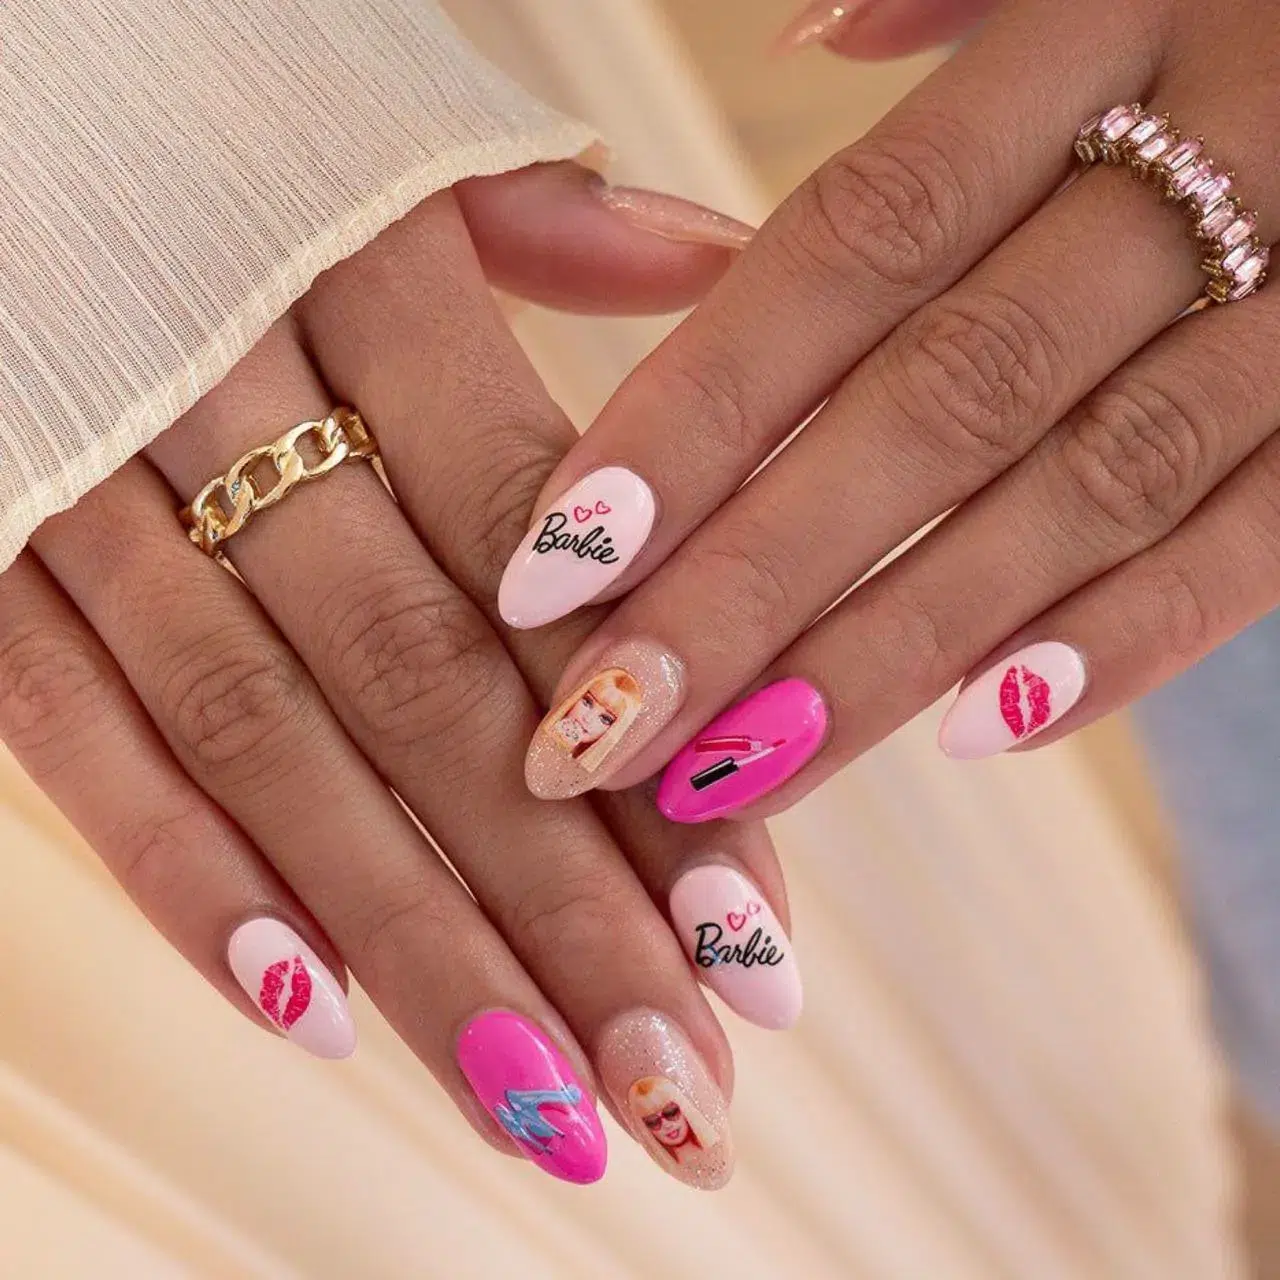 13 Barbiecore Nails to Embrace the Pink Trend | Darcy